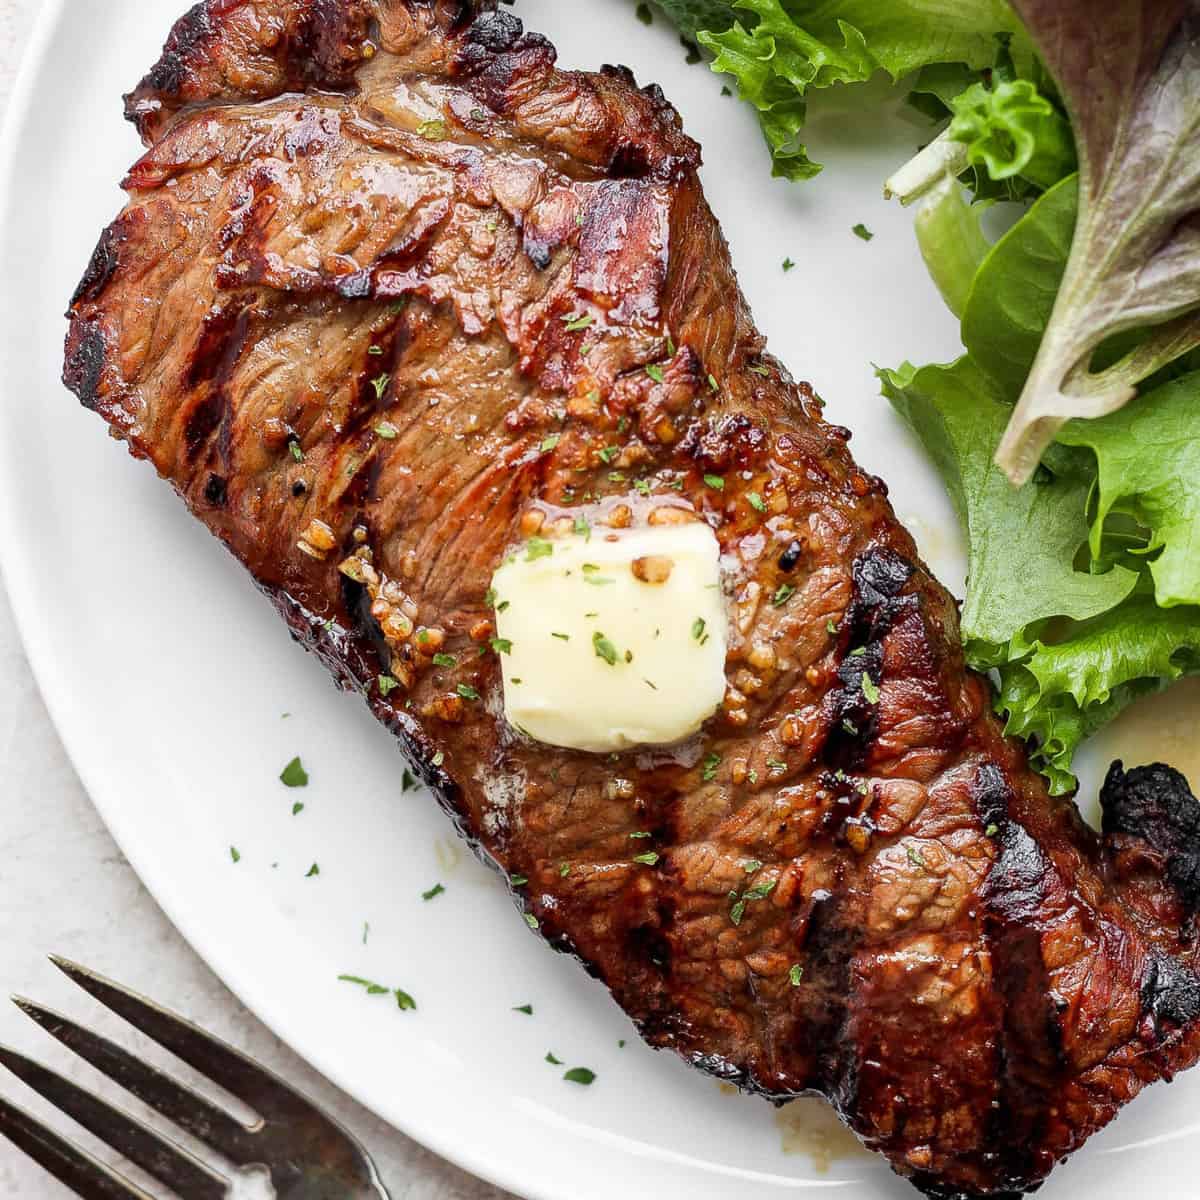 https://fitfoodiefinds.com/wp-content/uploads/2021/04/grilled-steak.jpg